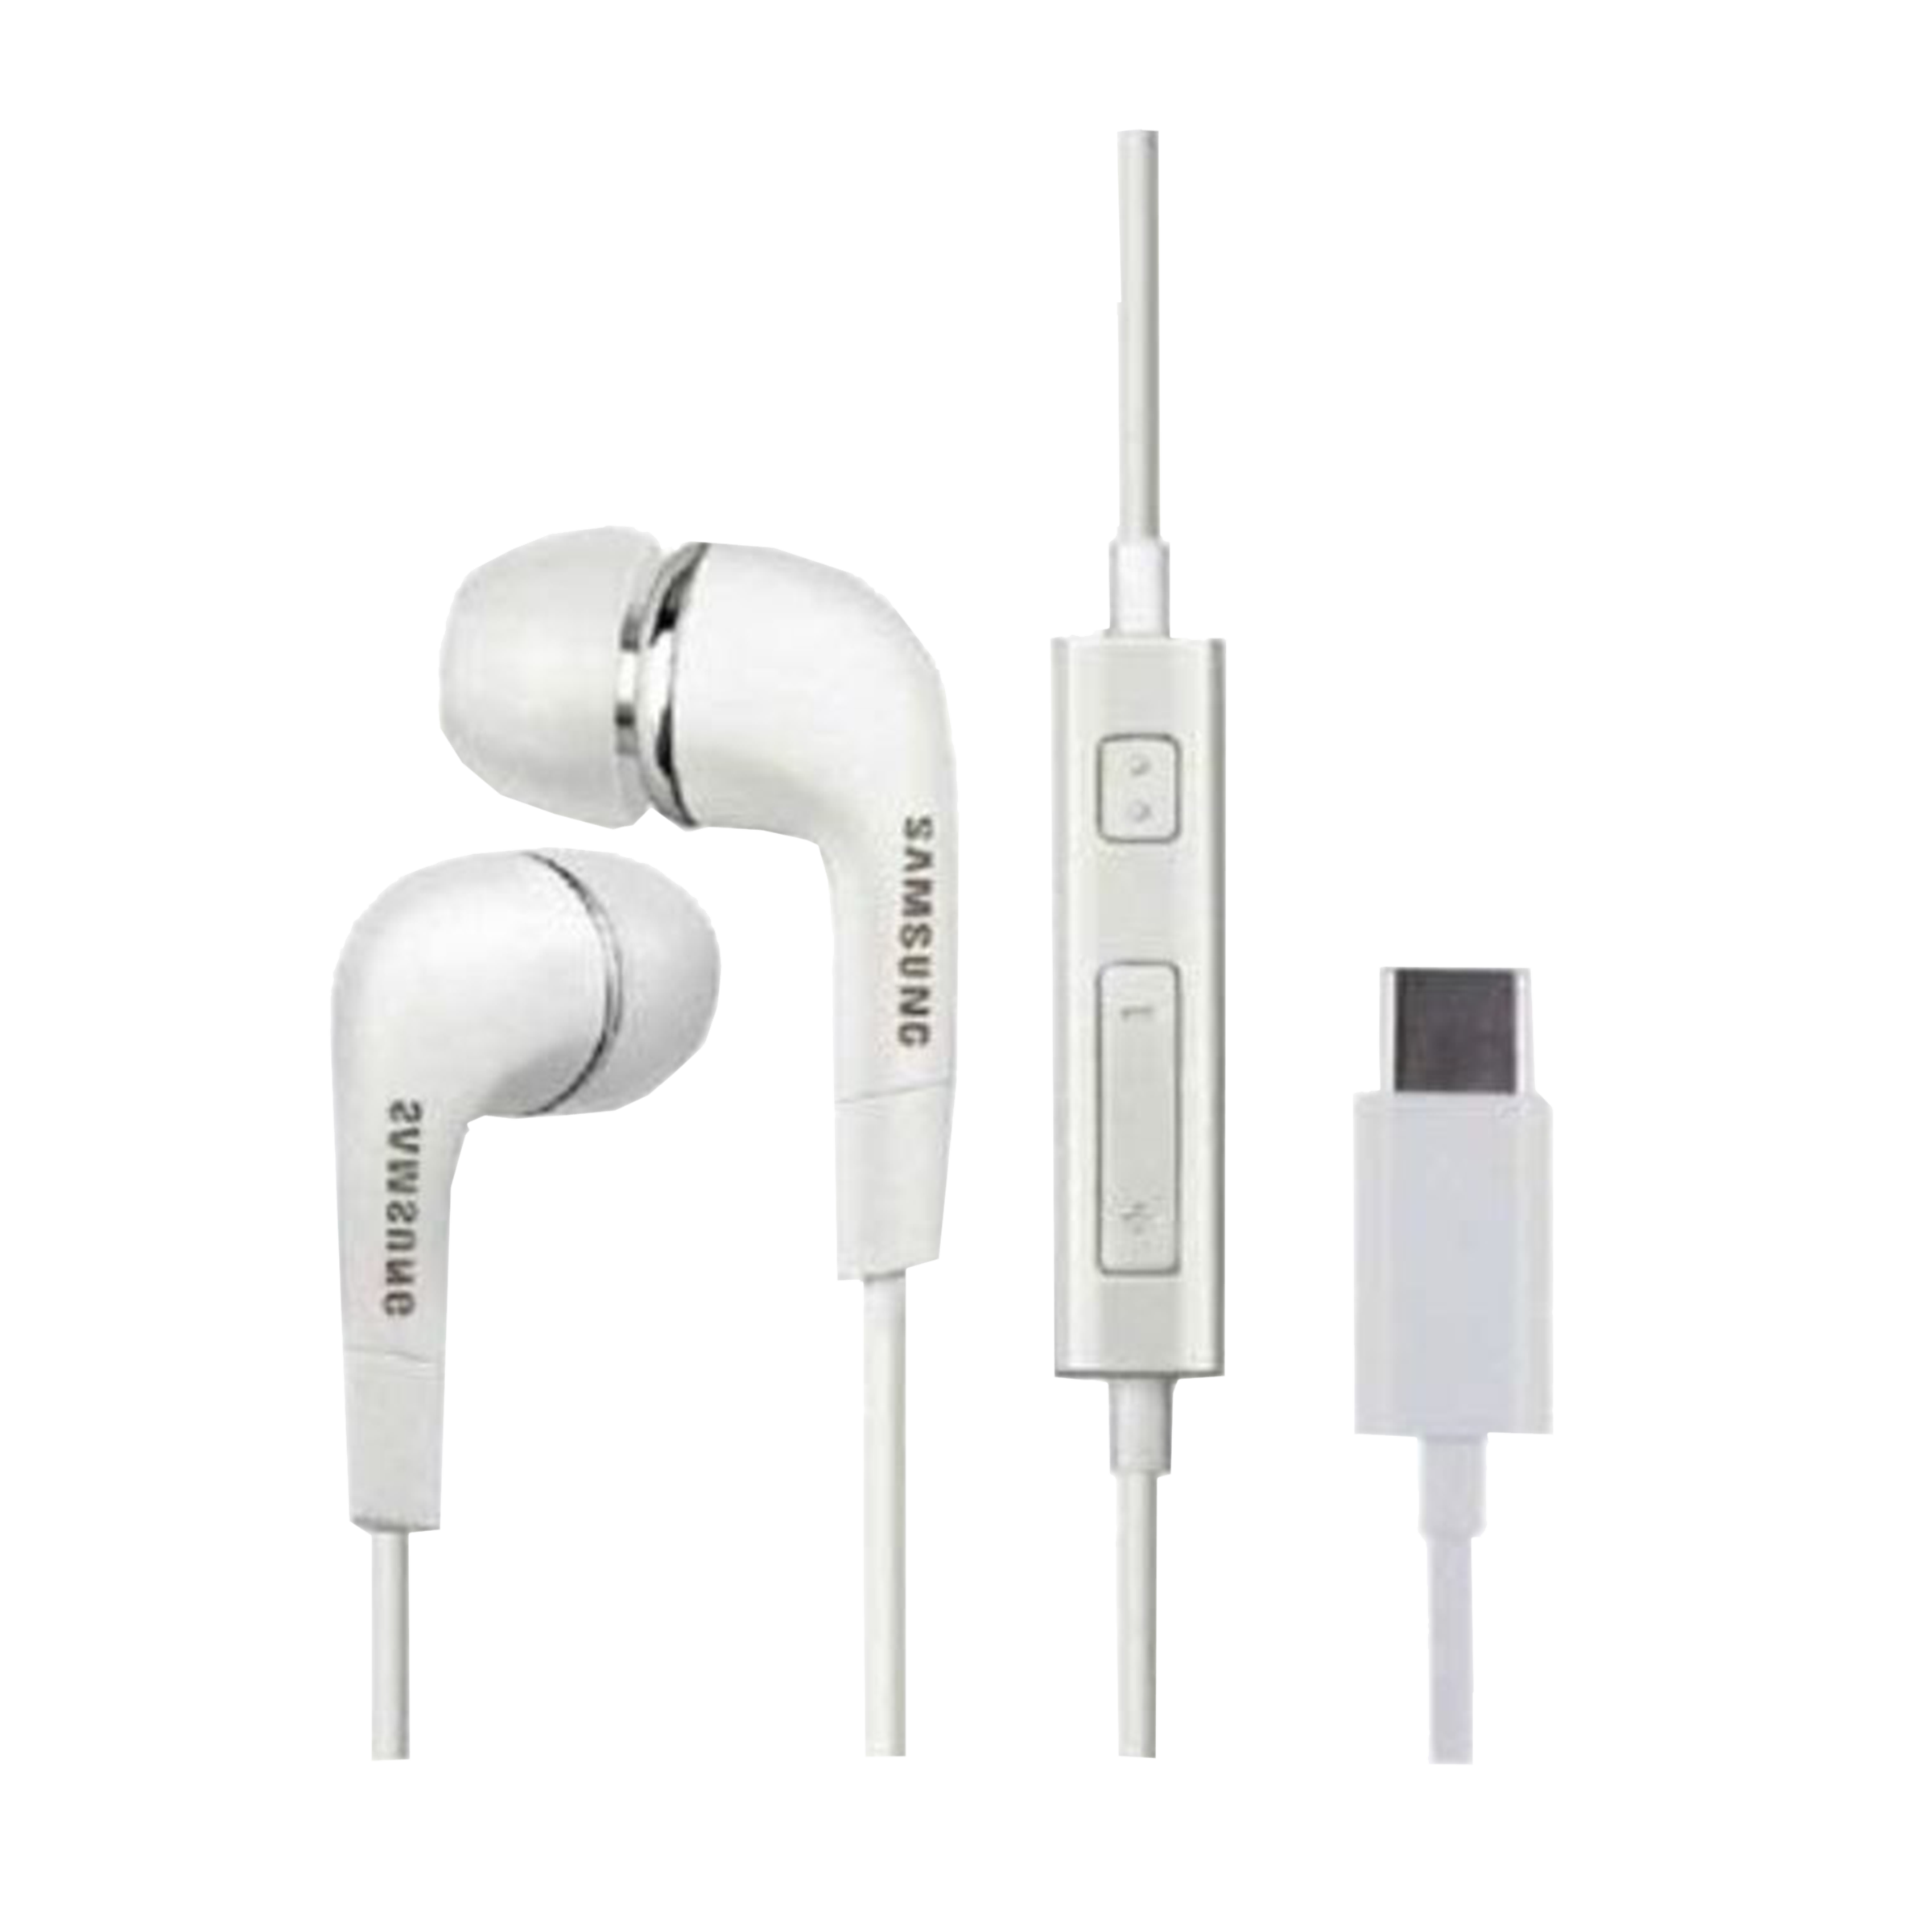 SAMSUNG IC050 In-Ear Wired Earphone with Mic (Type-C Interface Support, EO-IC050BWEGIN, White)_1